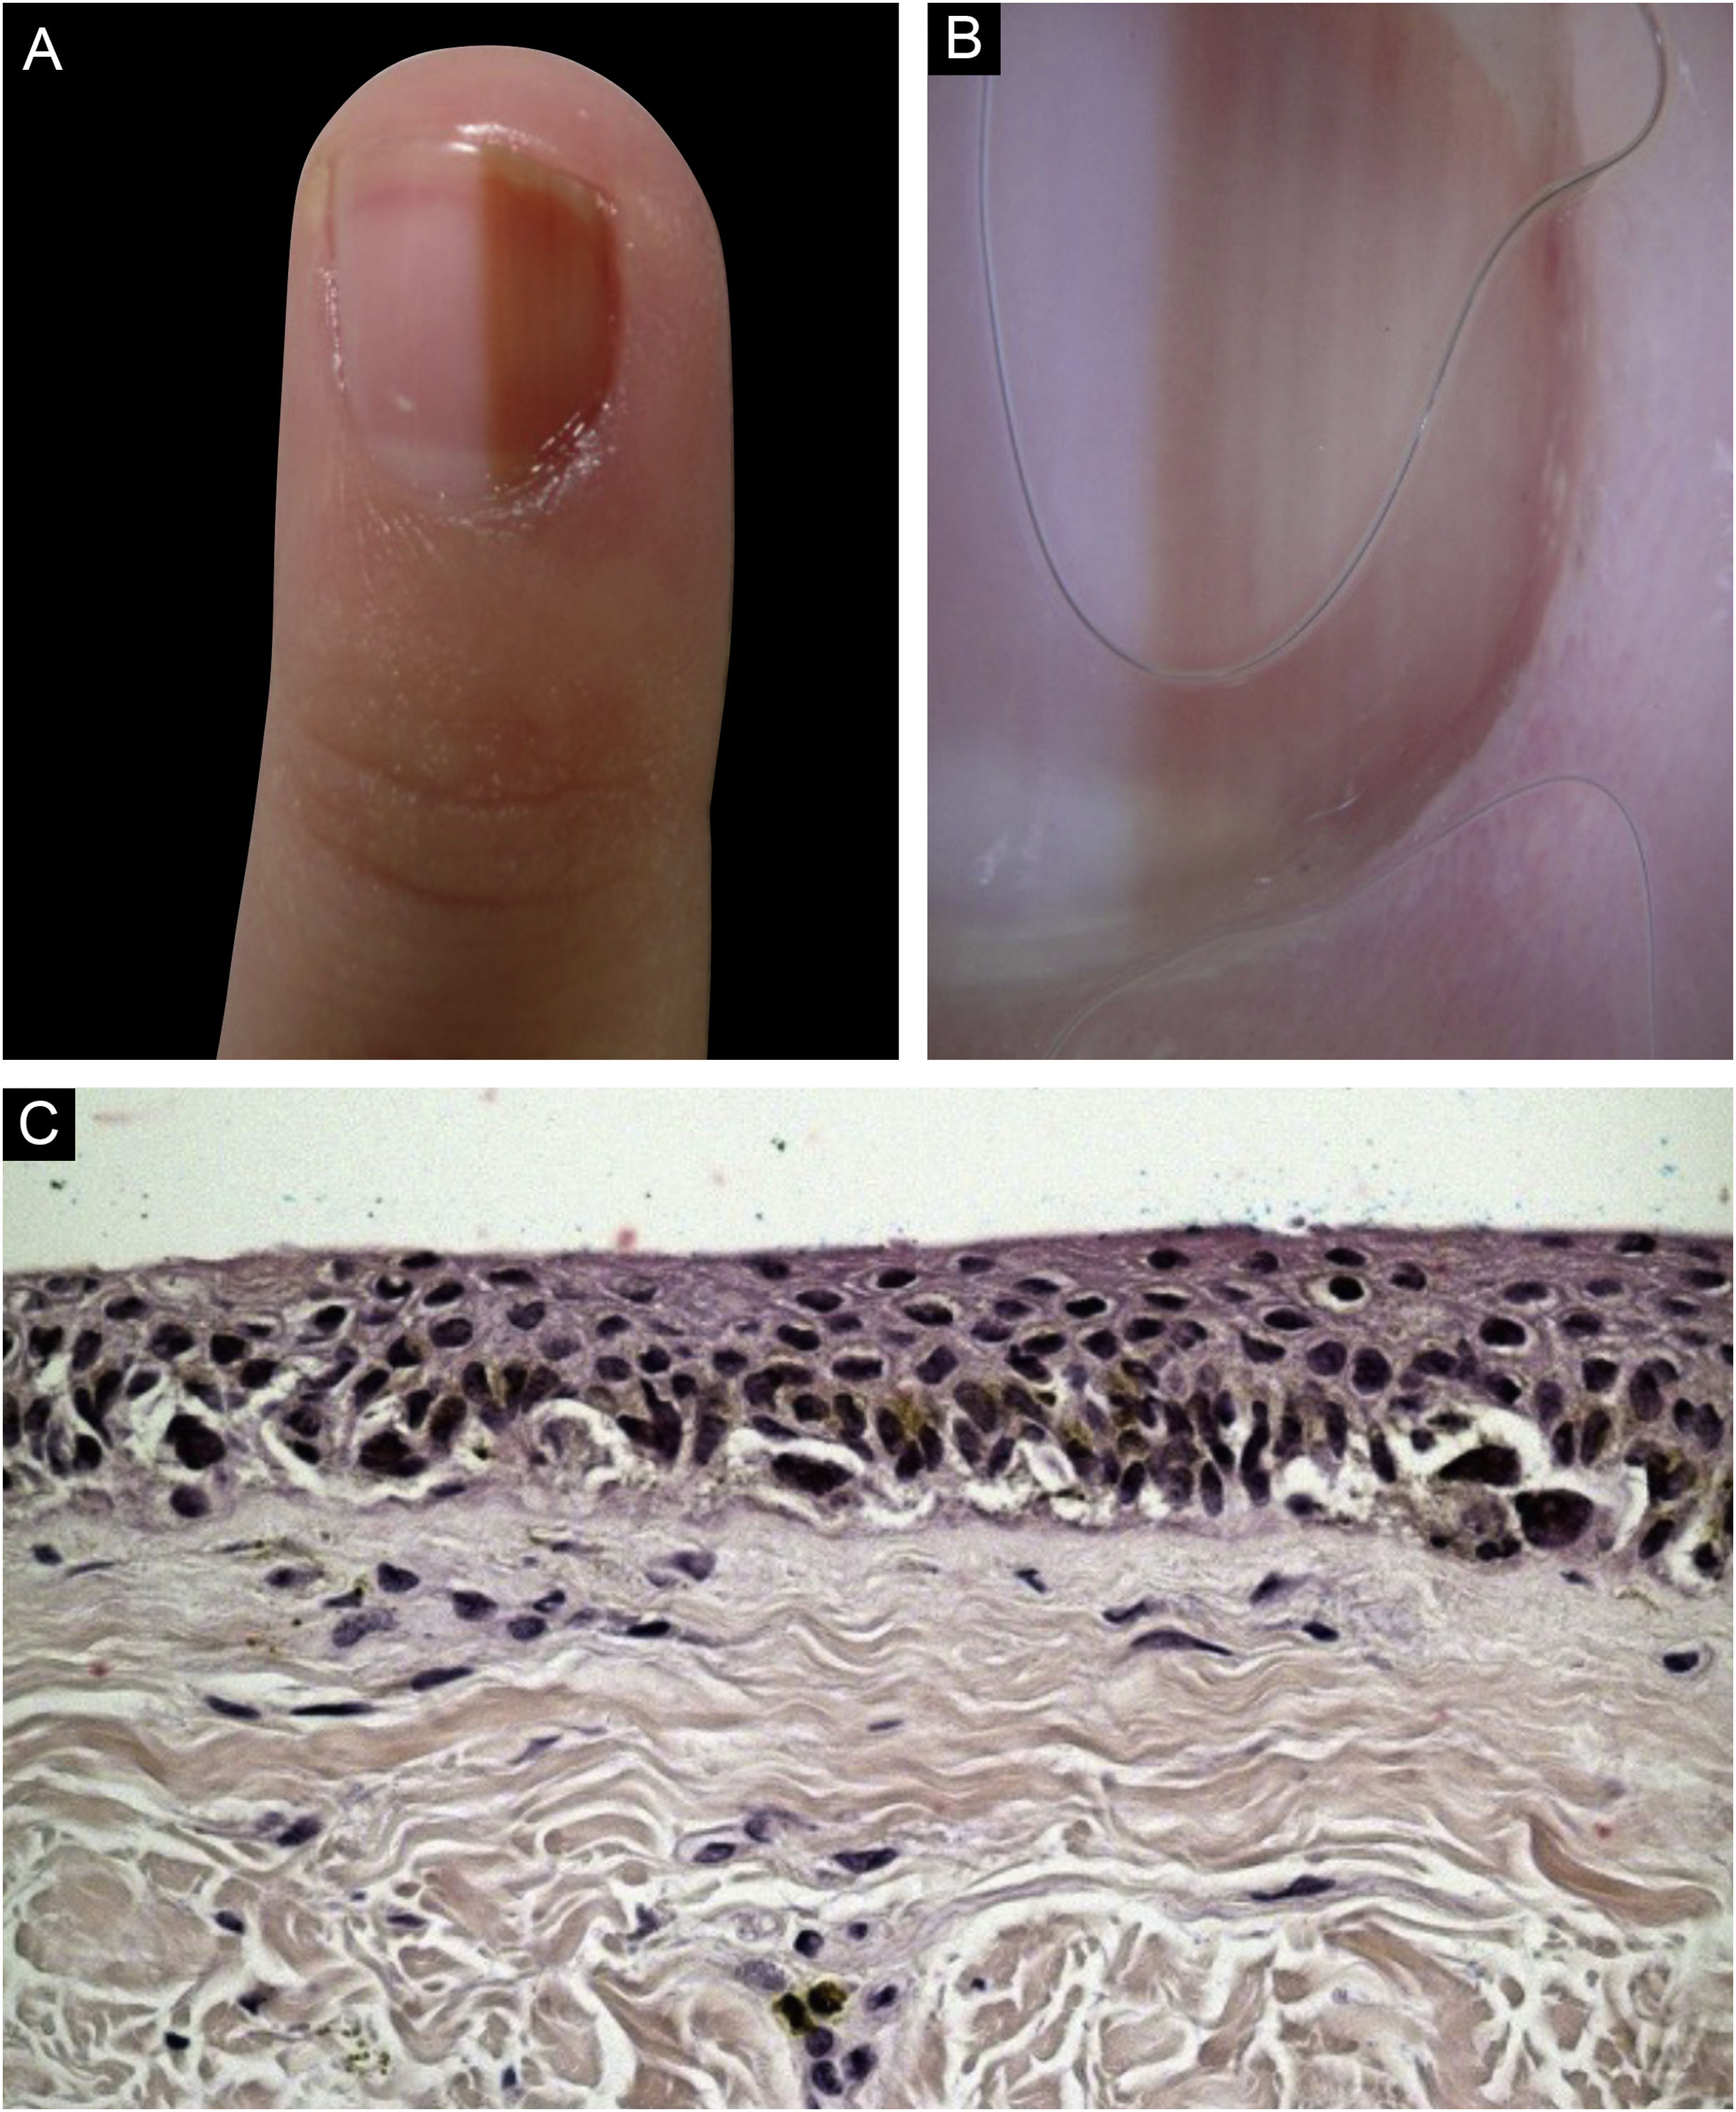 AAD Member - What's the diagnosis? A 52-year-old African-American man with  no history of immunosuppression or human papillomavirus infection presented  with a 5-month history of a 3.5-mm brown longitudinal band on the